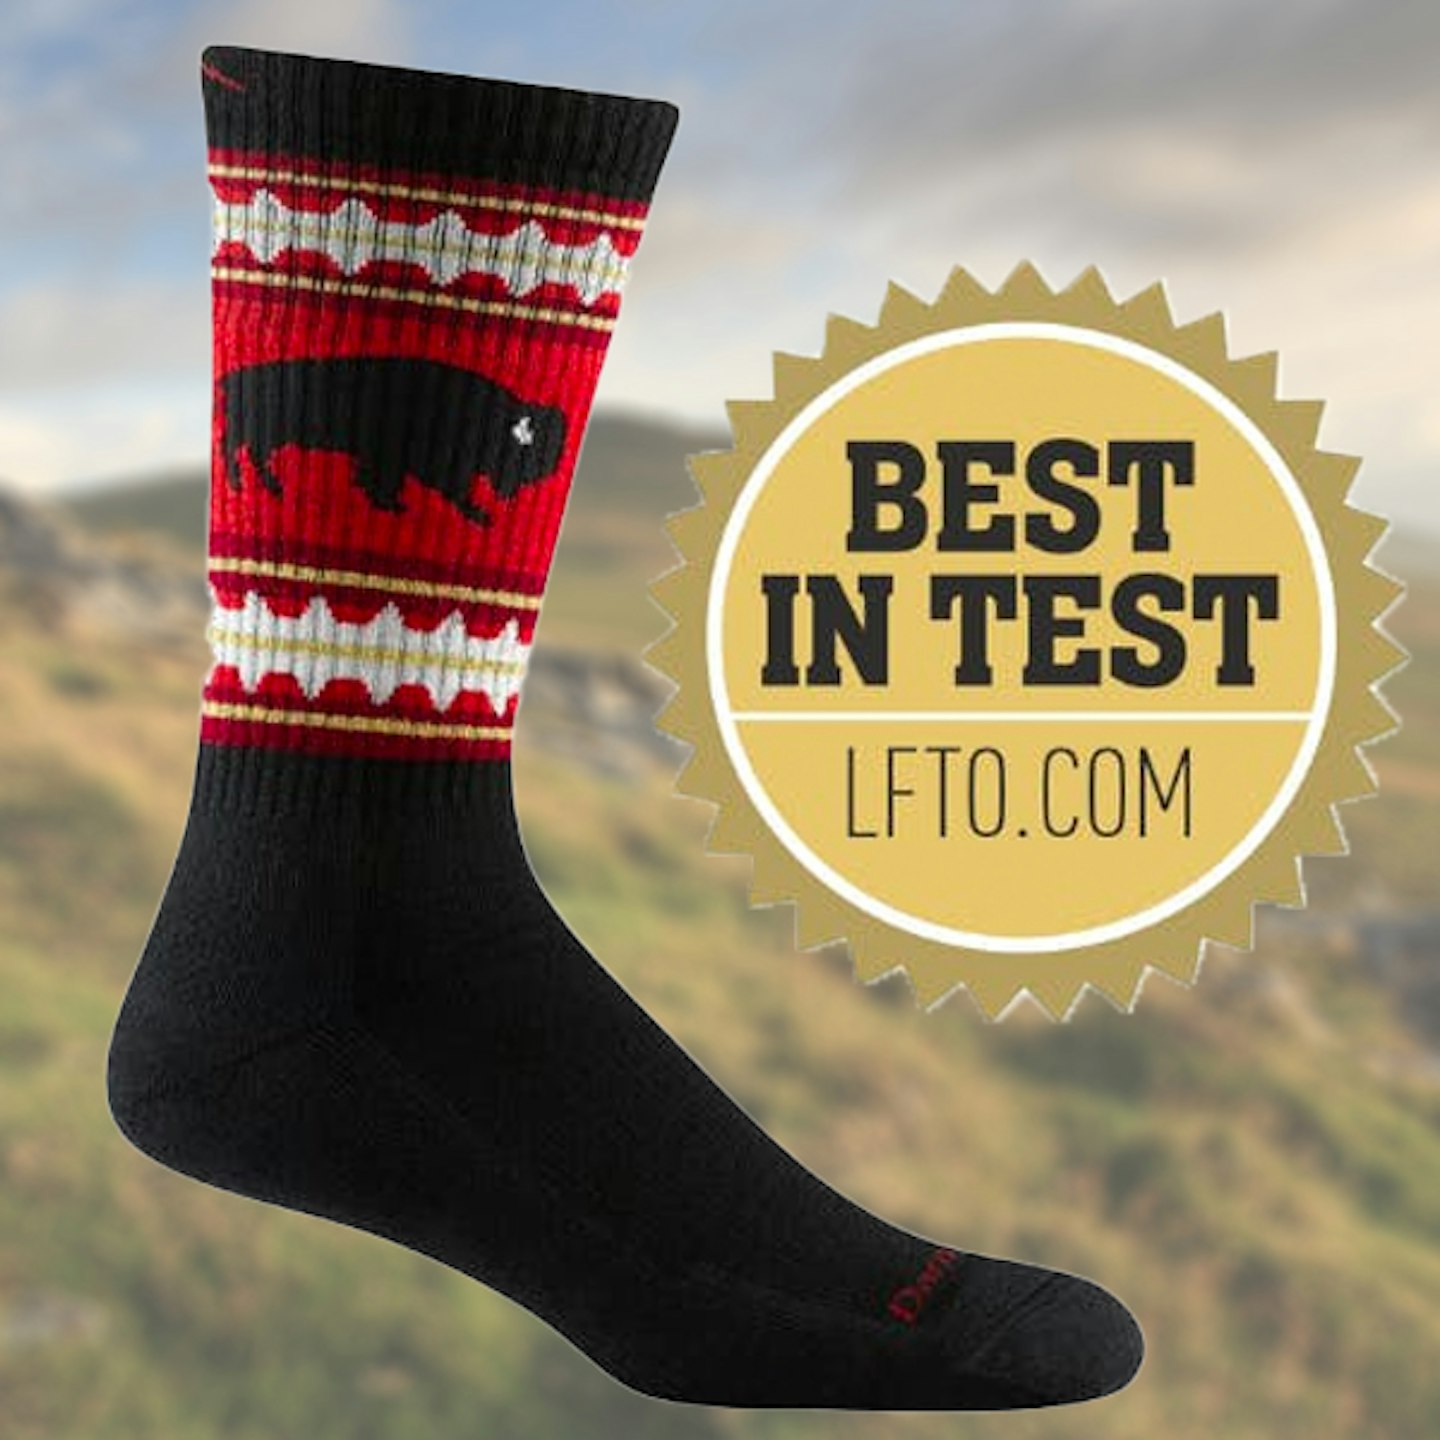 Darn Tough VanGrizzle Boot Midweight Hiking Sock